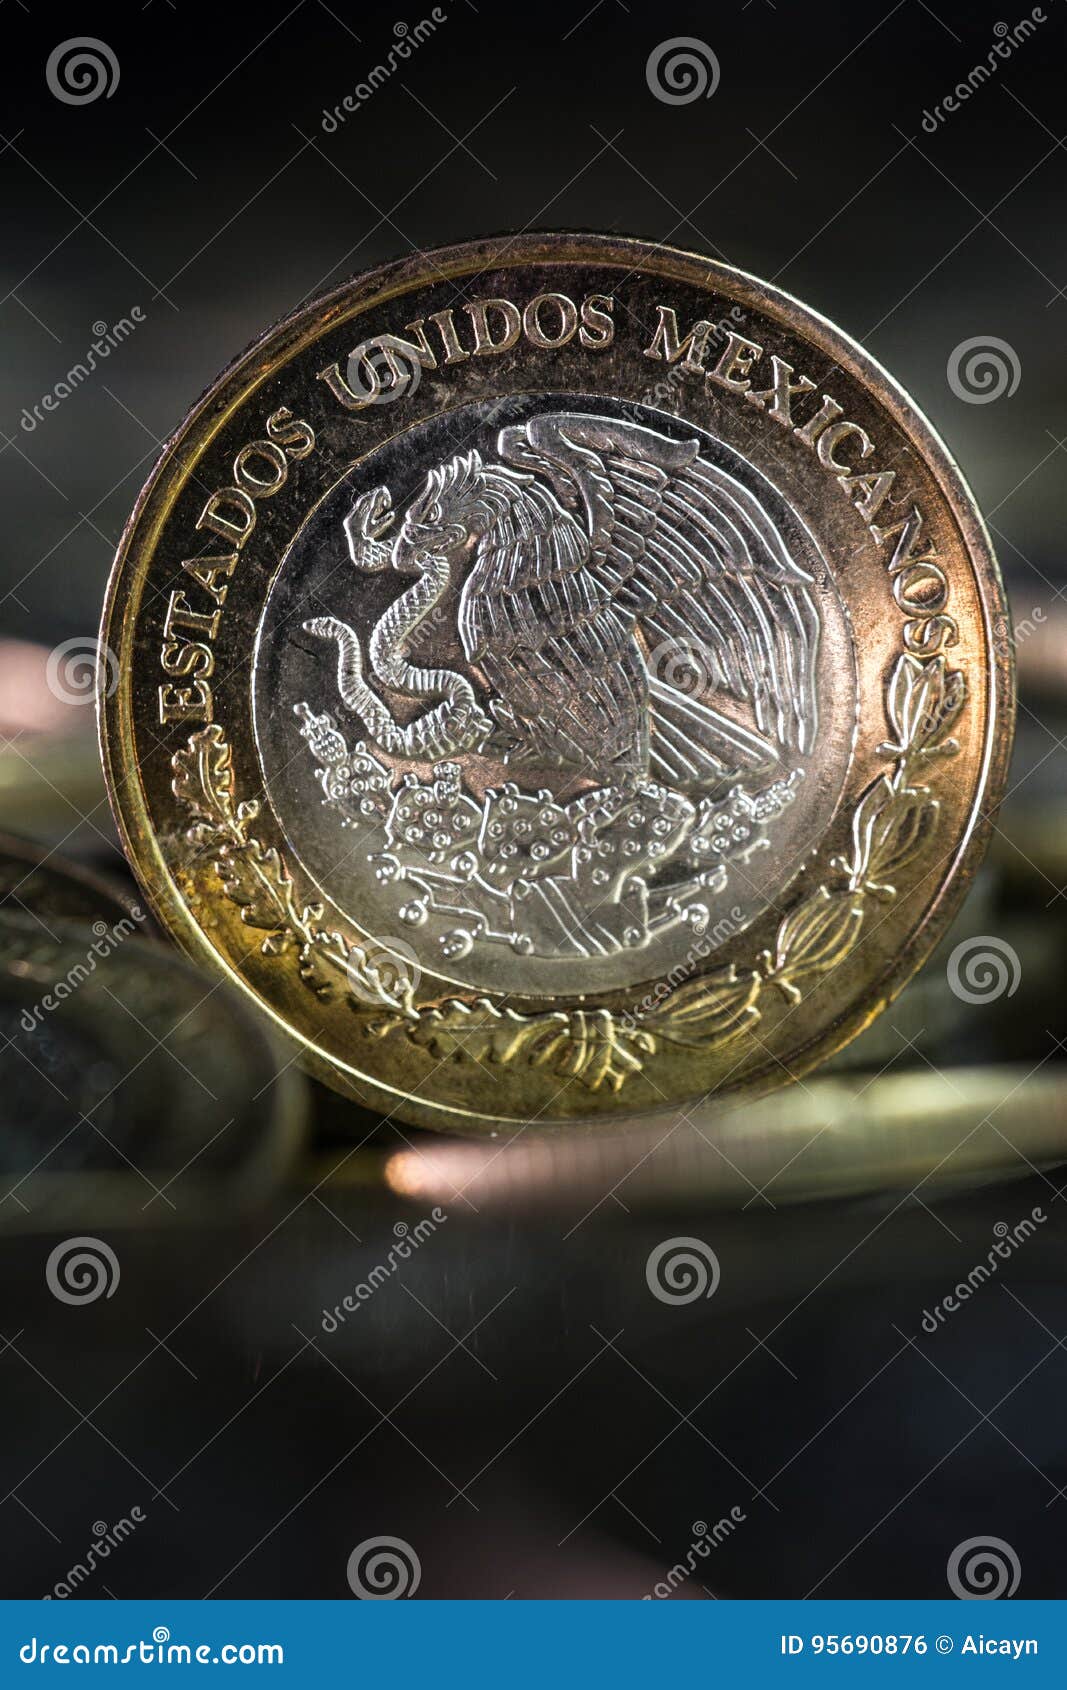 mexican currency in the foreground,with dark background